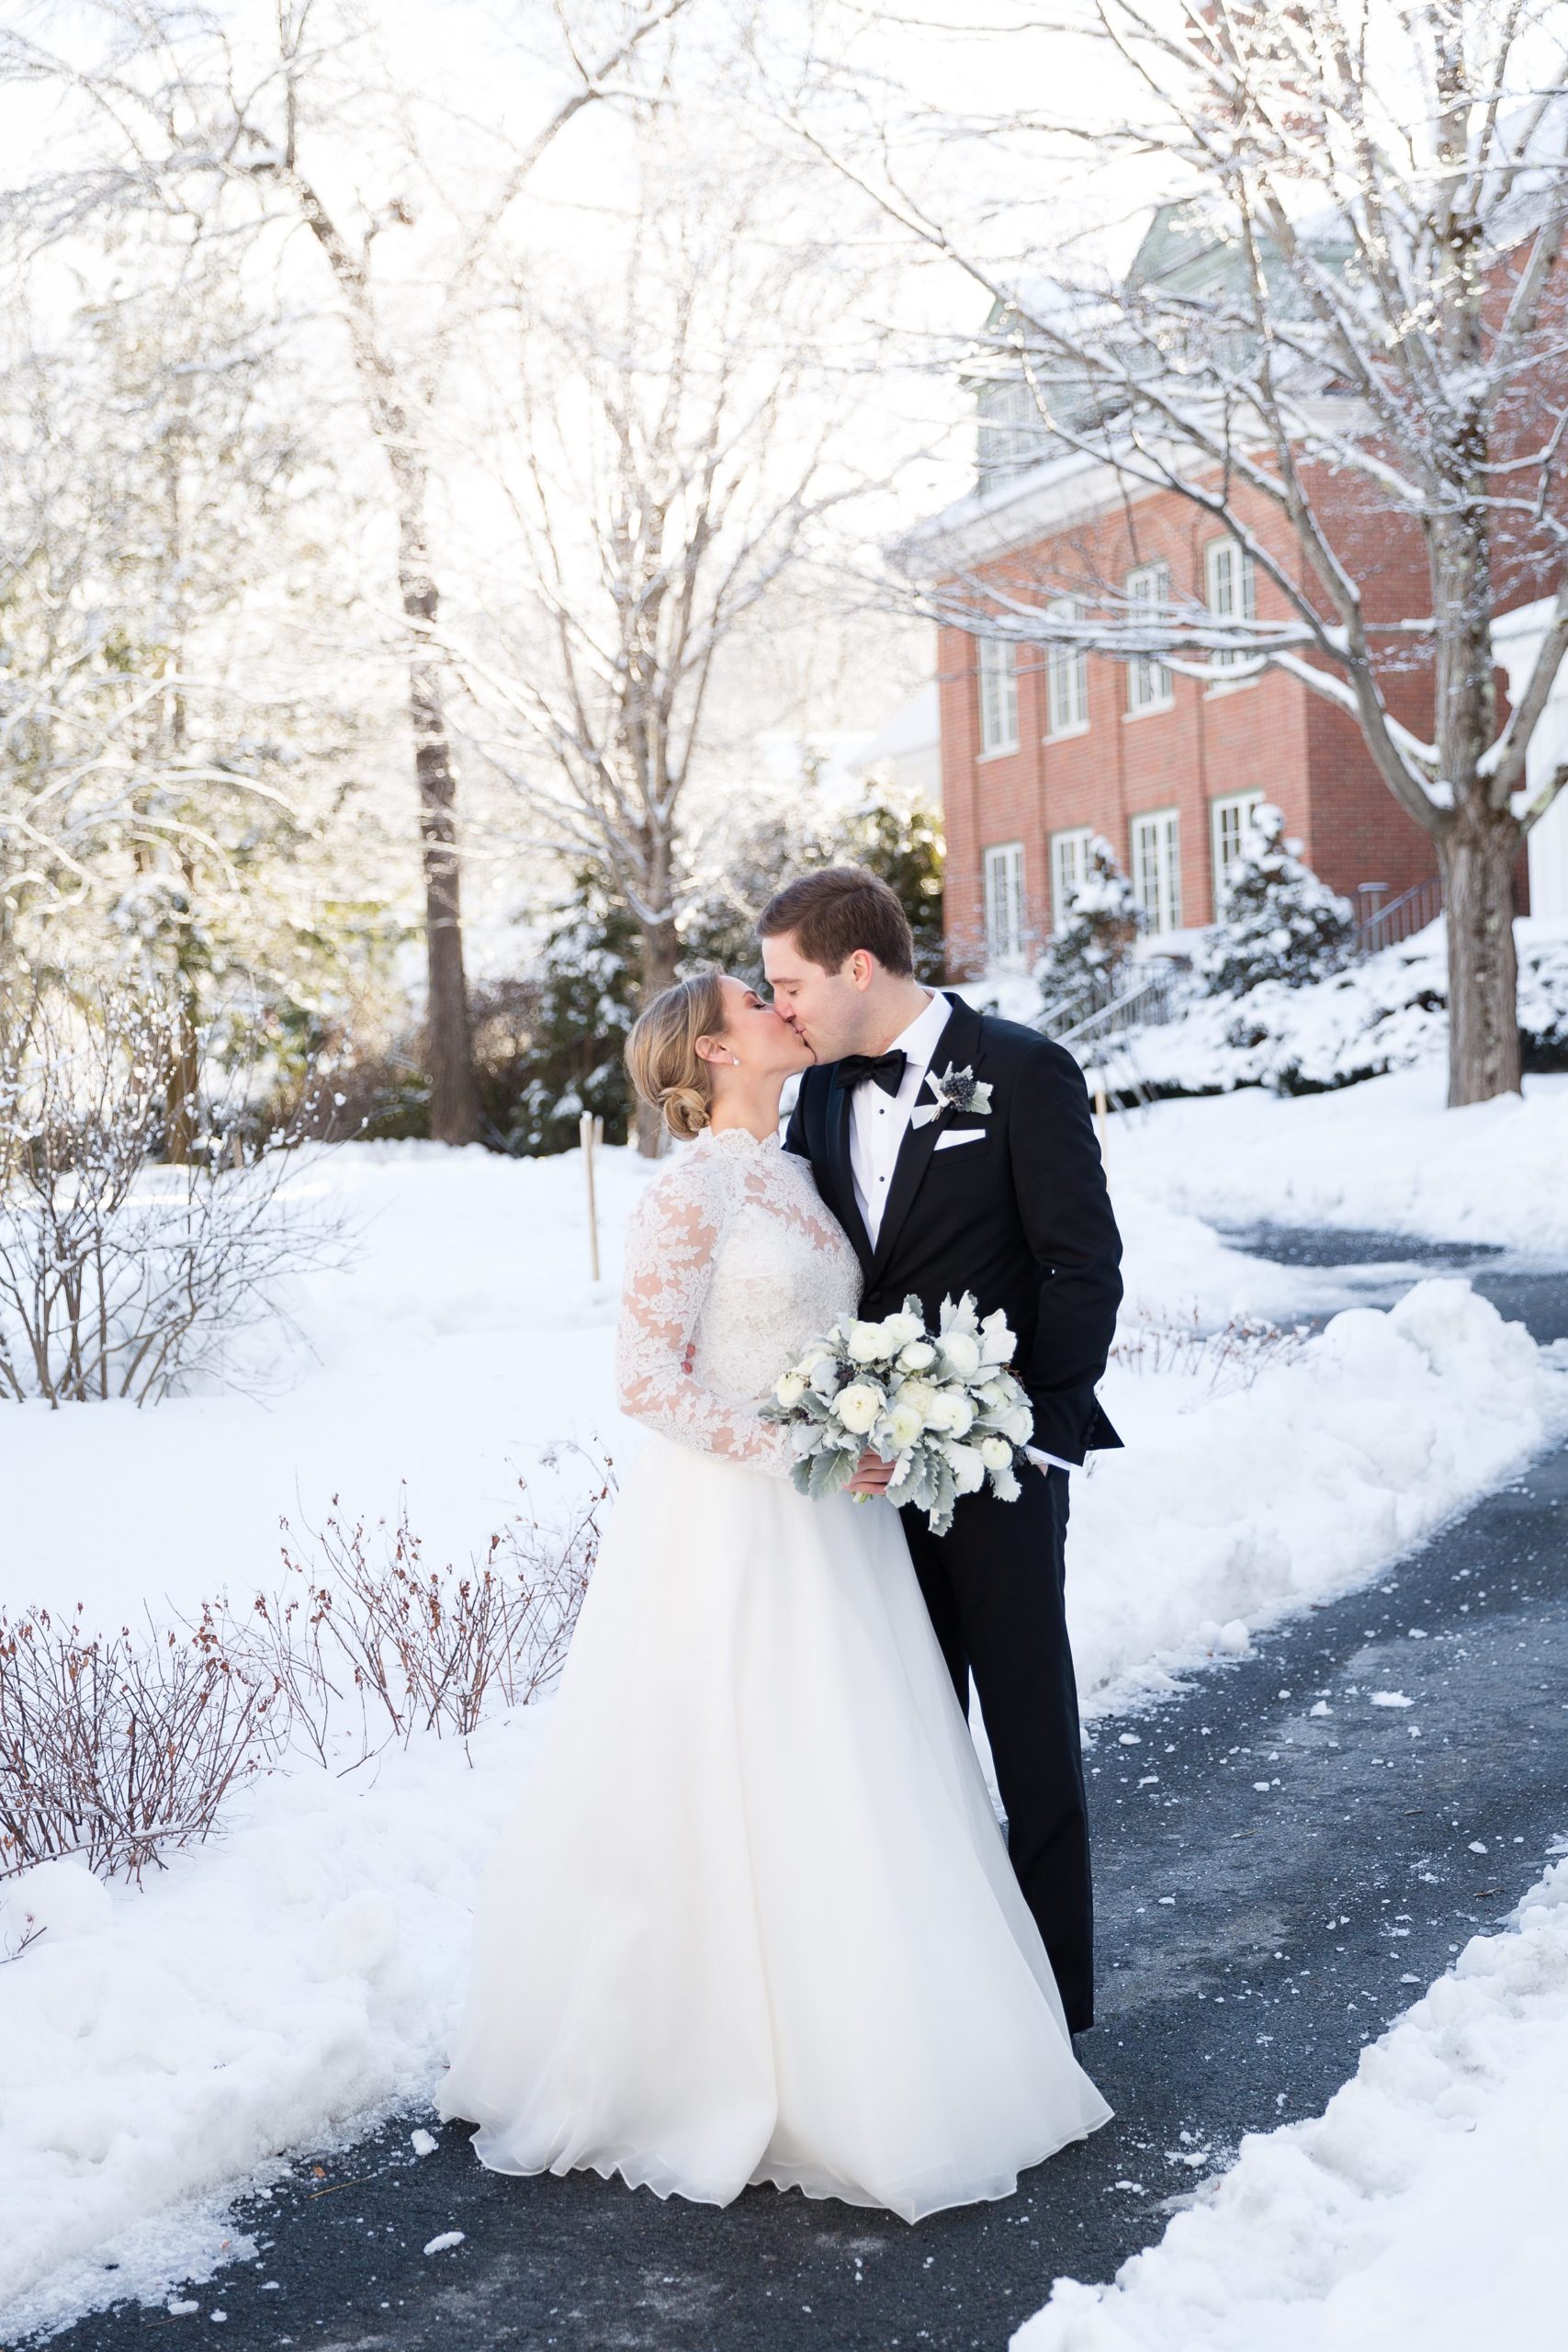 Bride and groom portraits for winter wedding at the Woodstock Inn